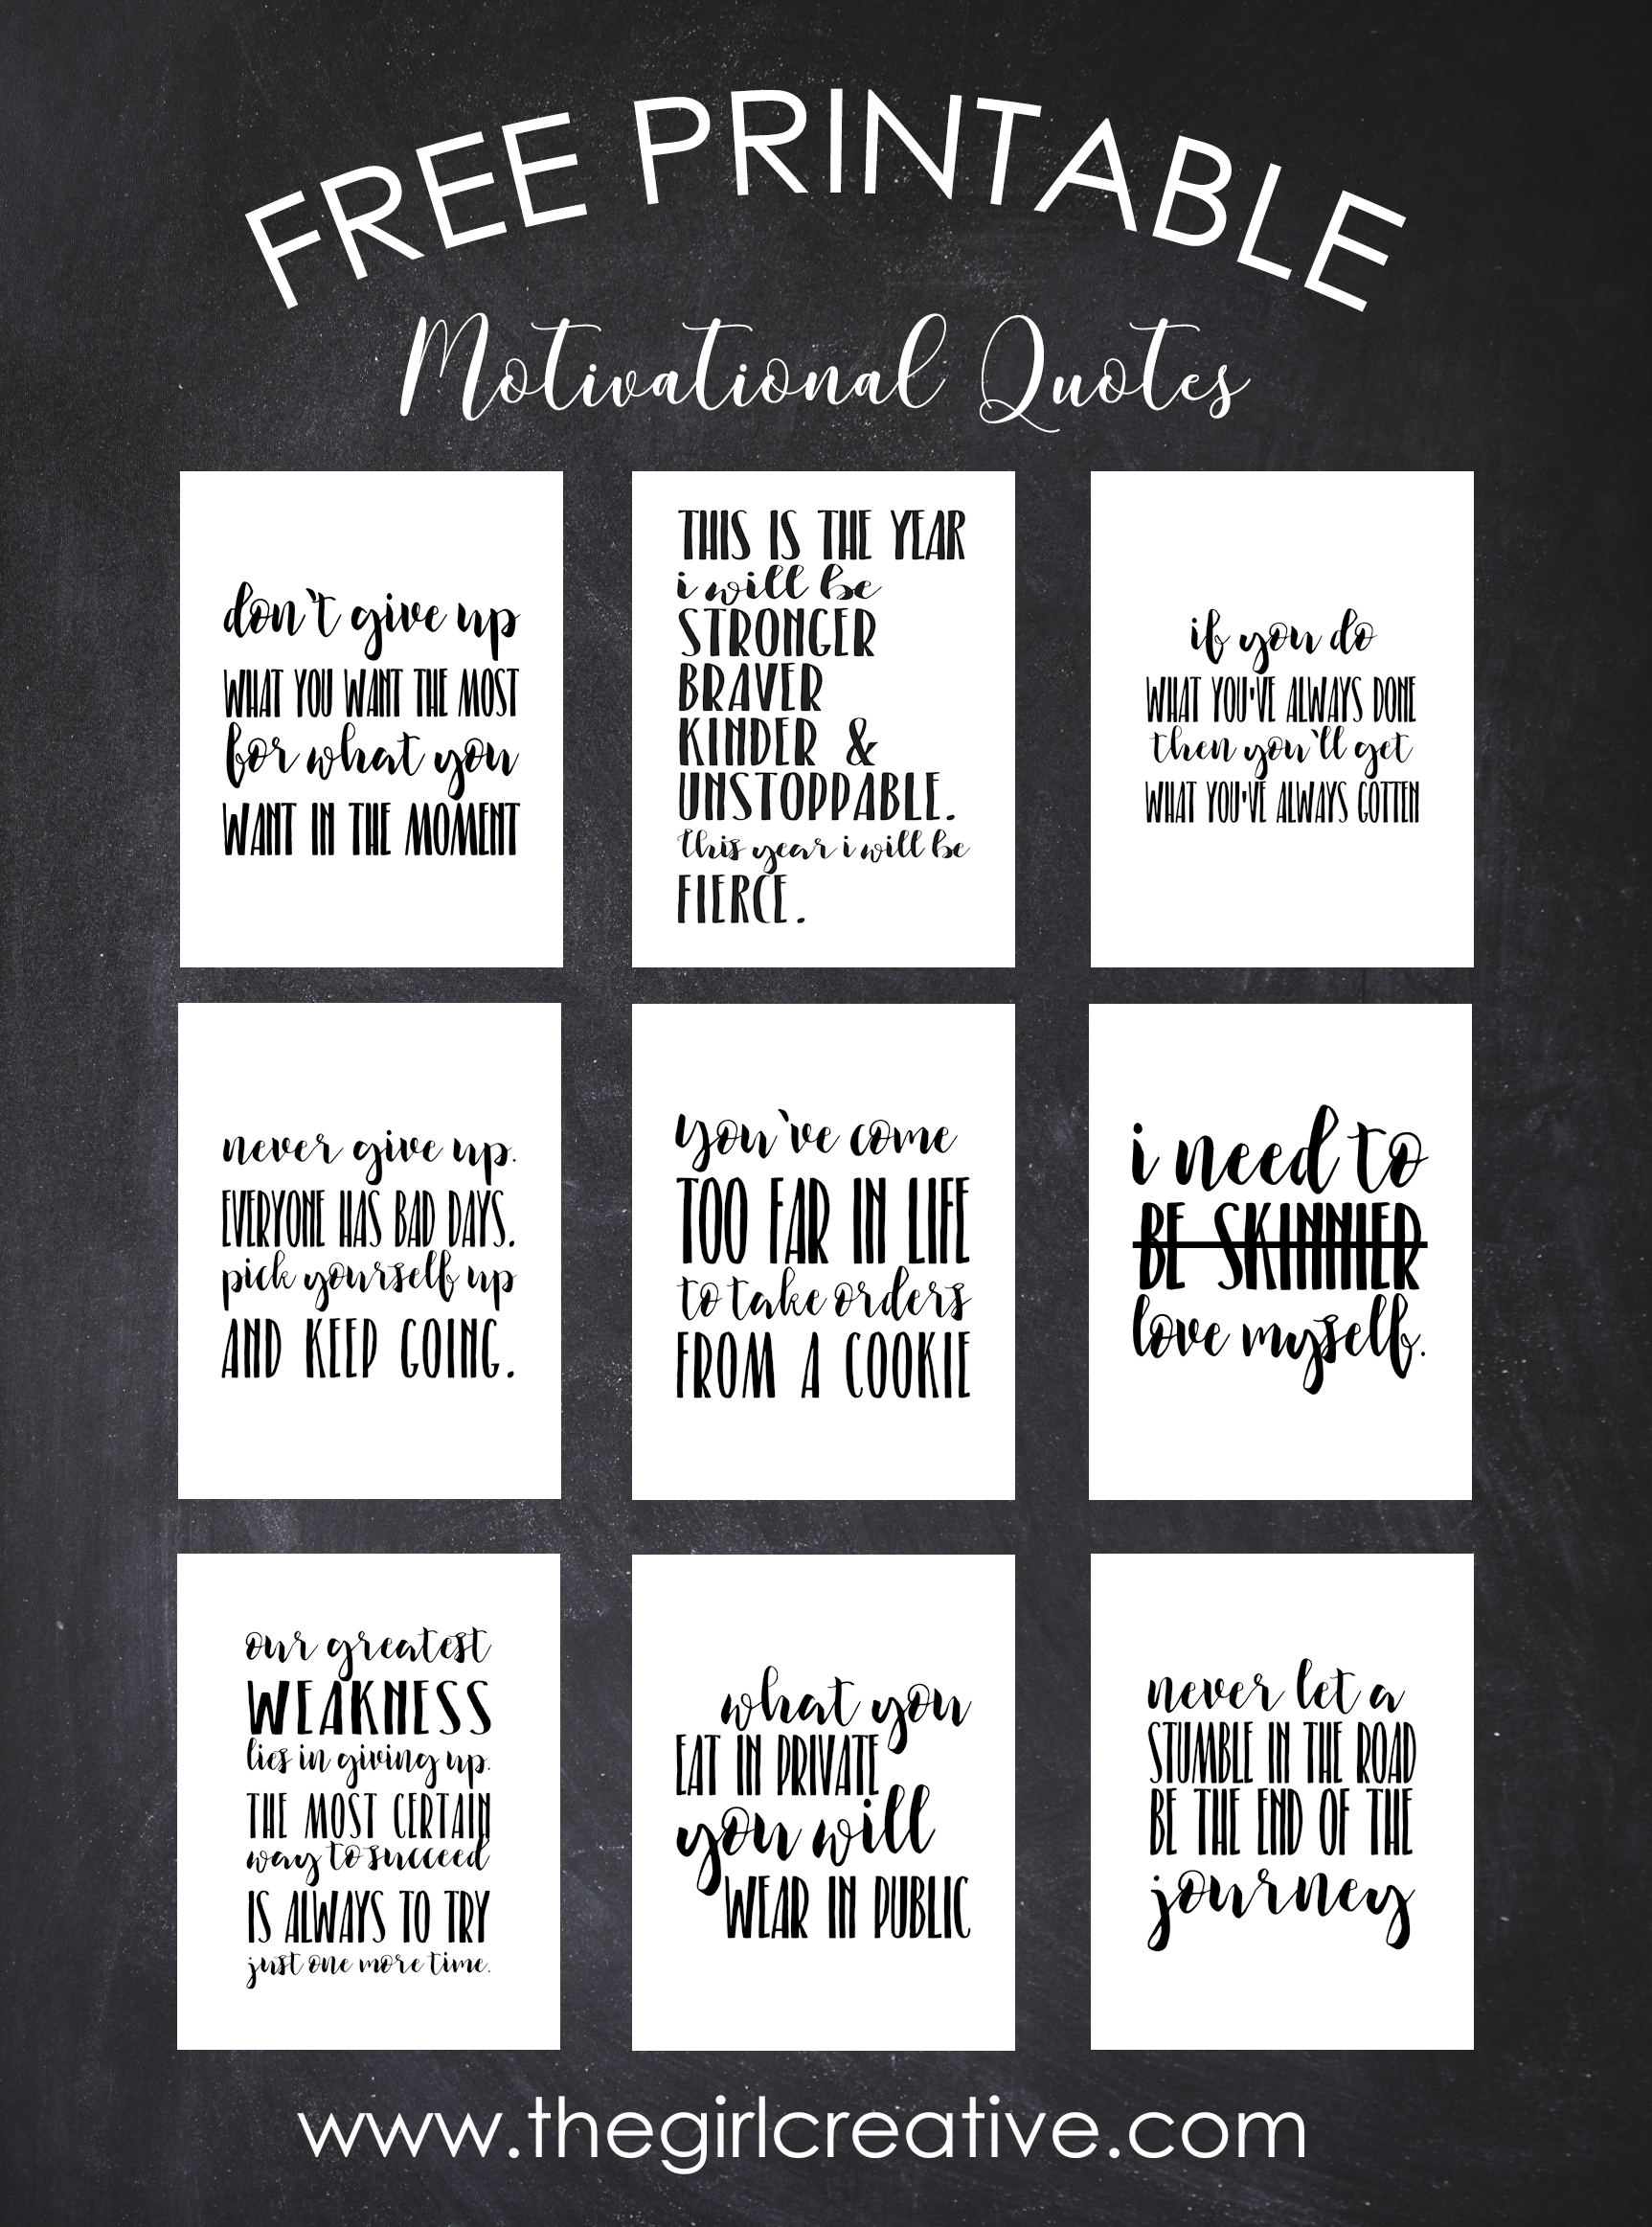 Free Printable Motivational Quotes - The Girl Creative - Free Printable Quotes